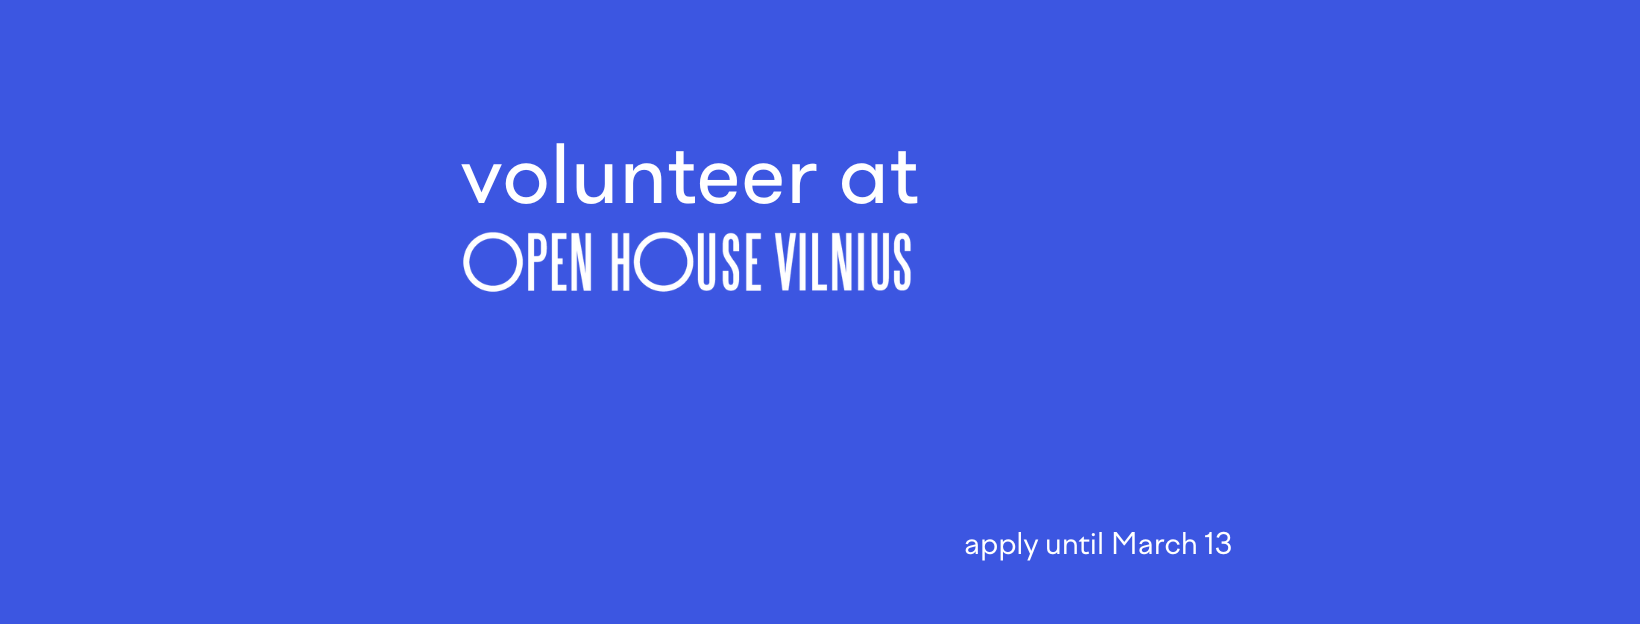 Open call for volunteers: join the Open House Vilnius team